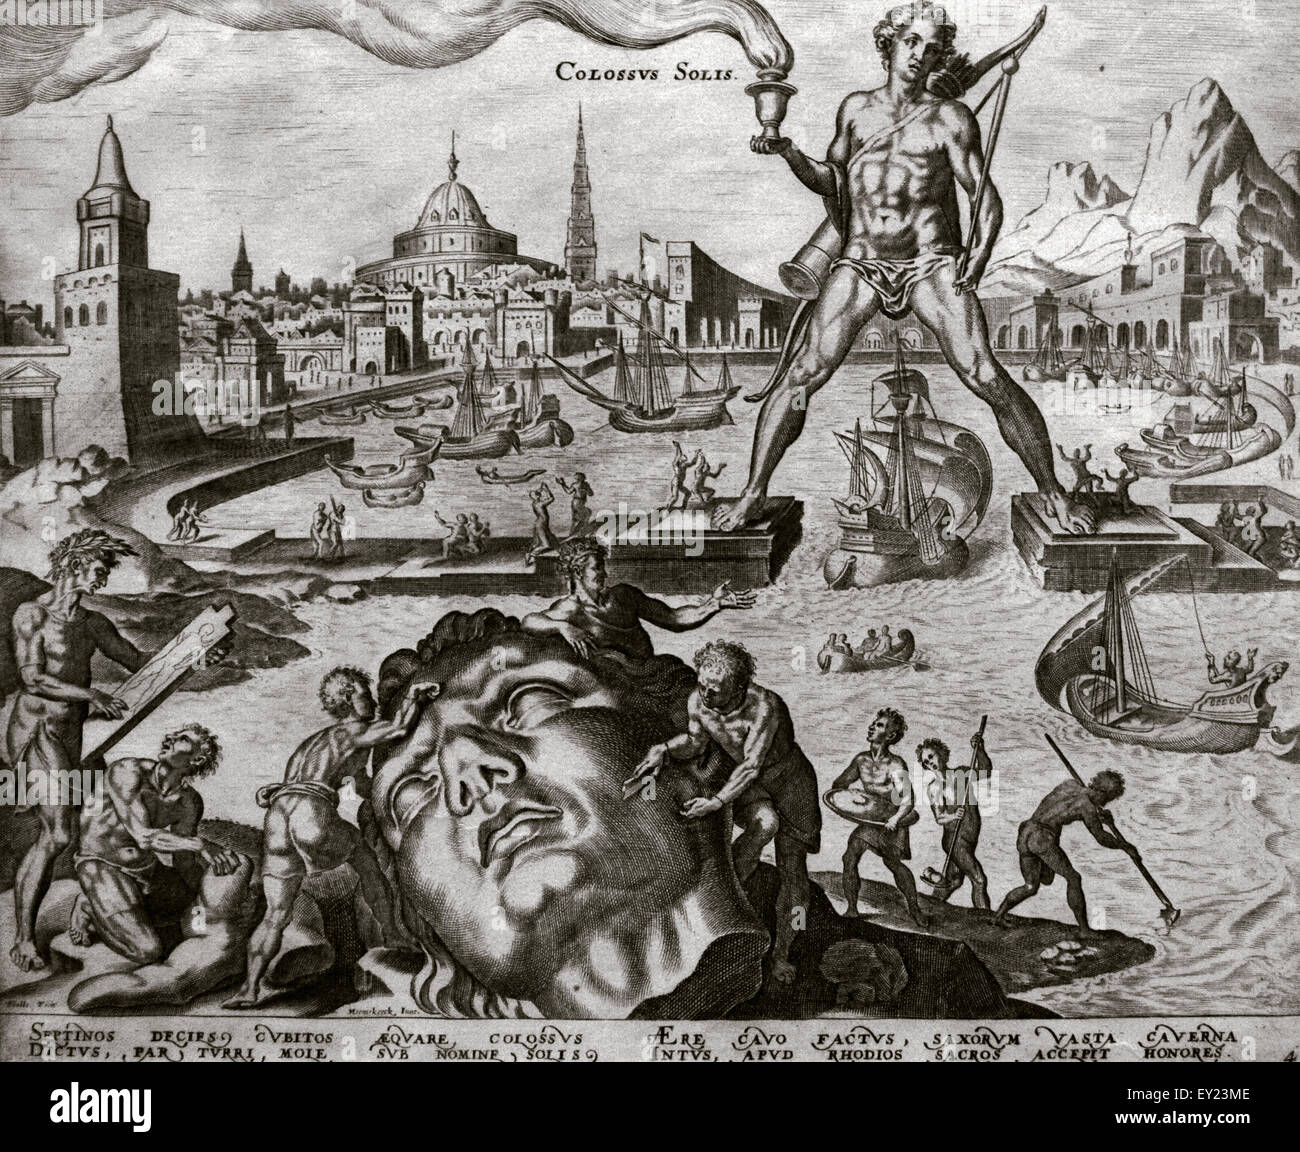 Seven Wonders of the Ancient World. The Colossus of Rhodes. Engraving by Philip Galle (1537-1612) after Martin van Heemskerck (1498-1574). 16th century. The Nelson-Atkins Museum of Art. Kansas City. United States. Stock Photo